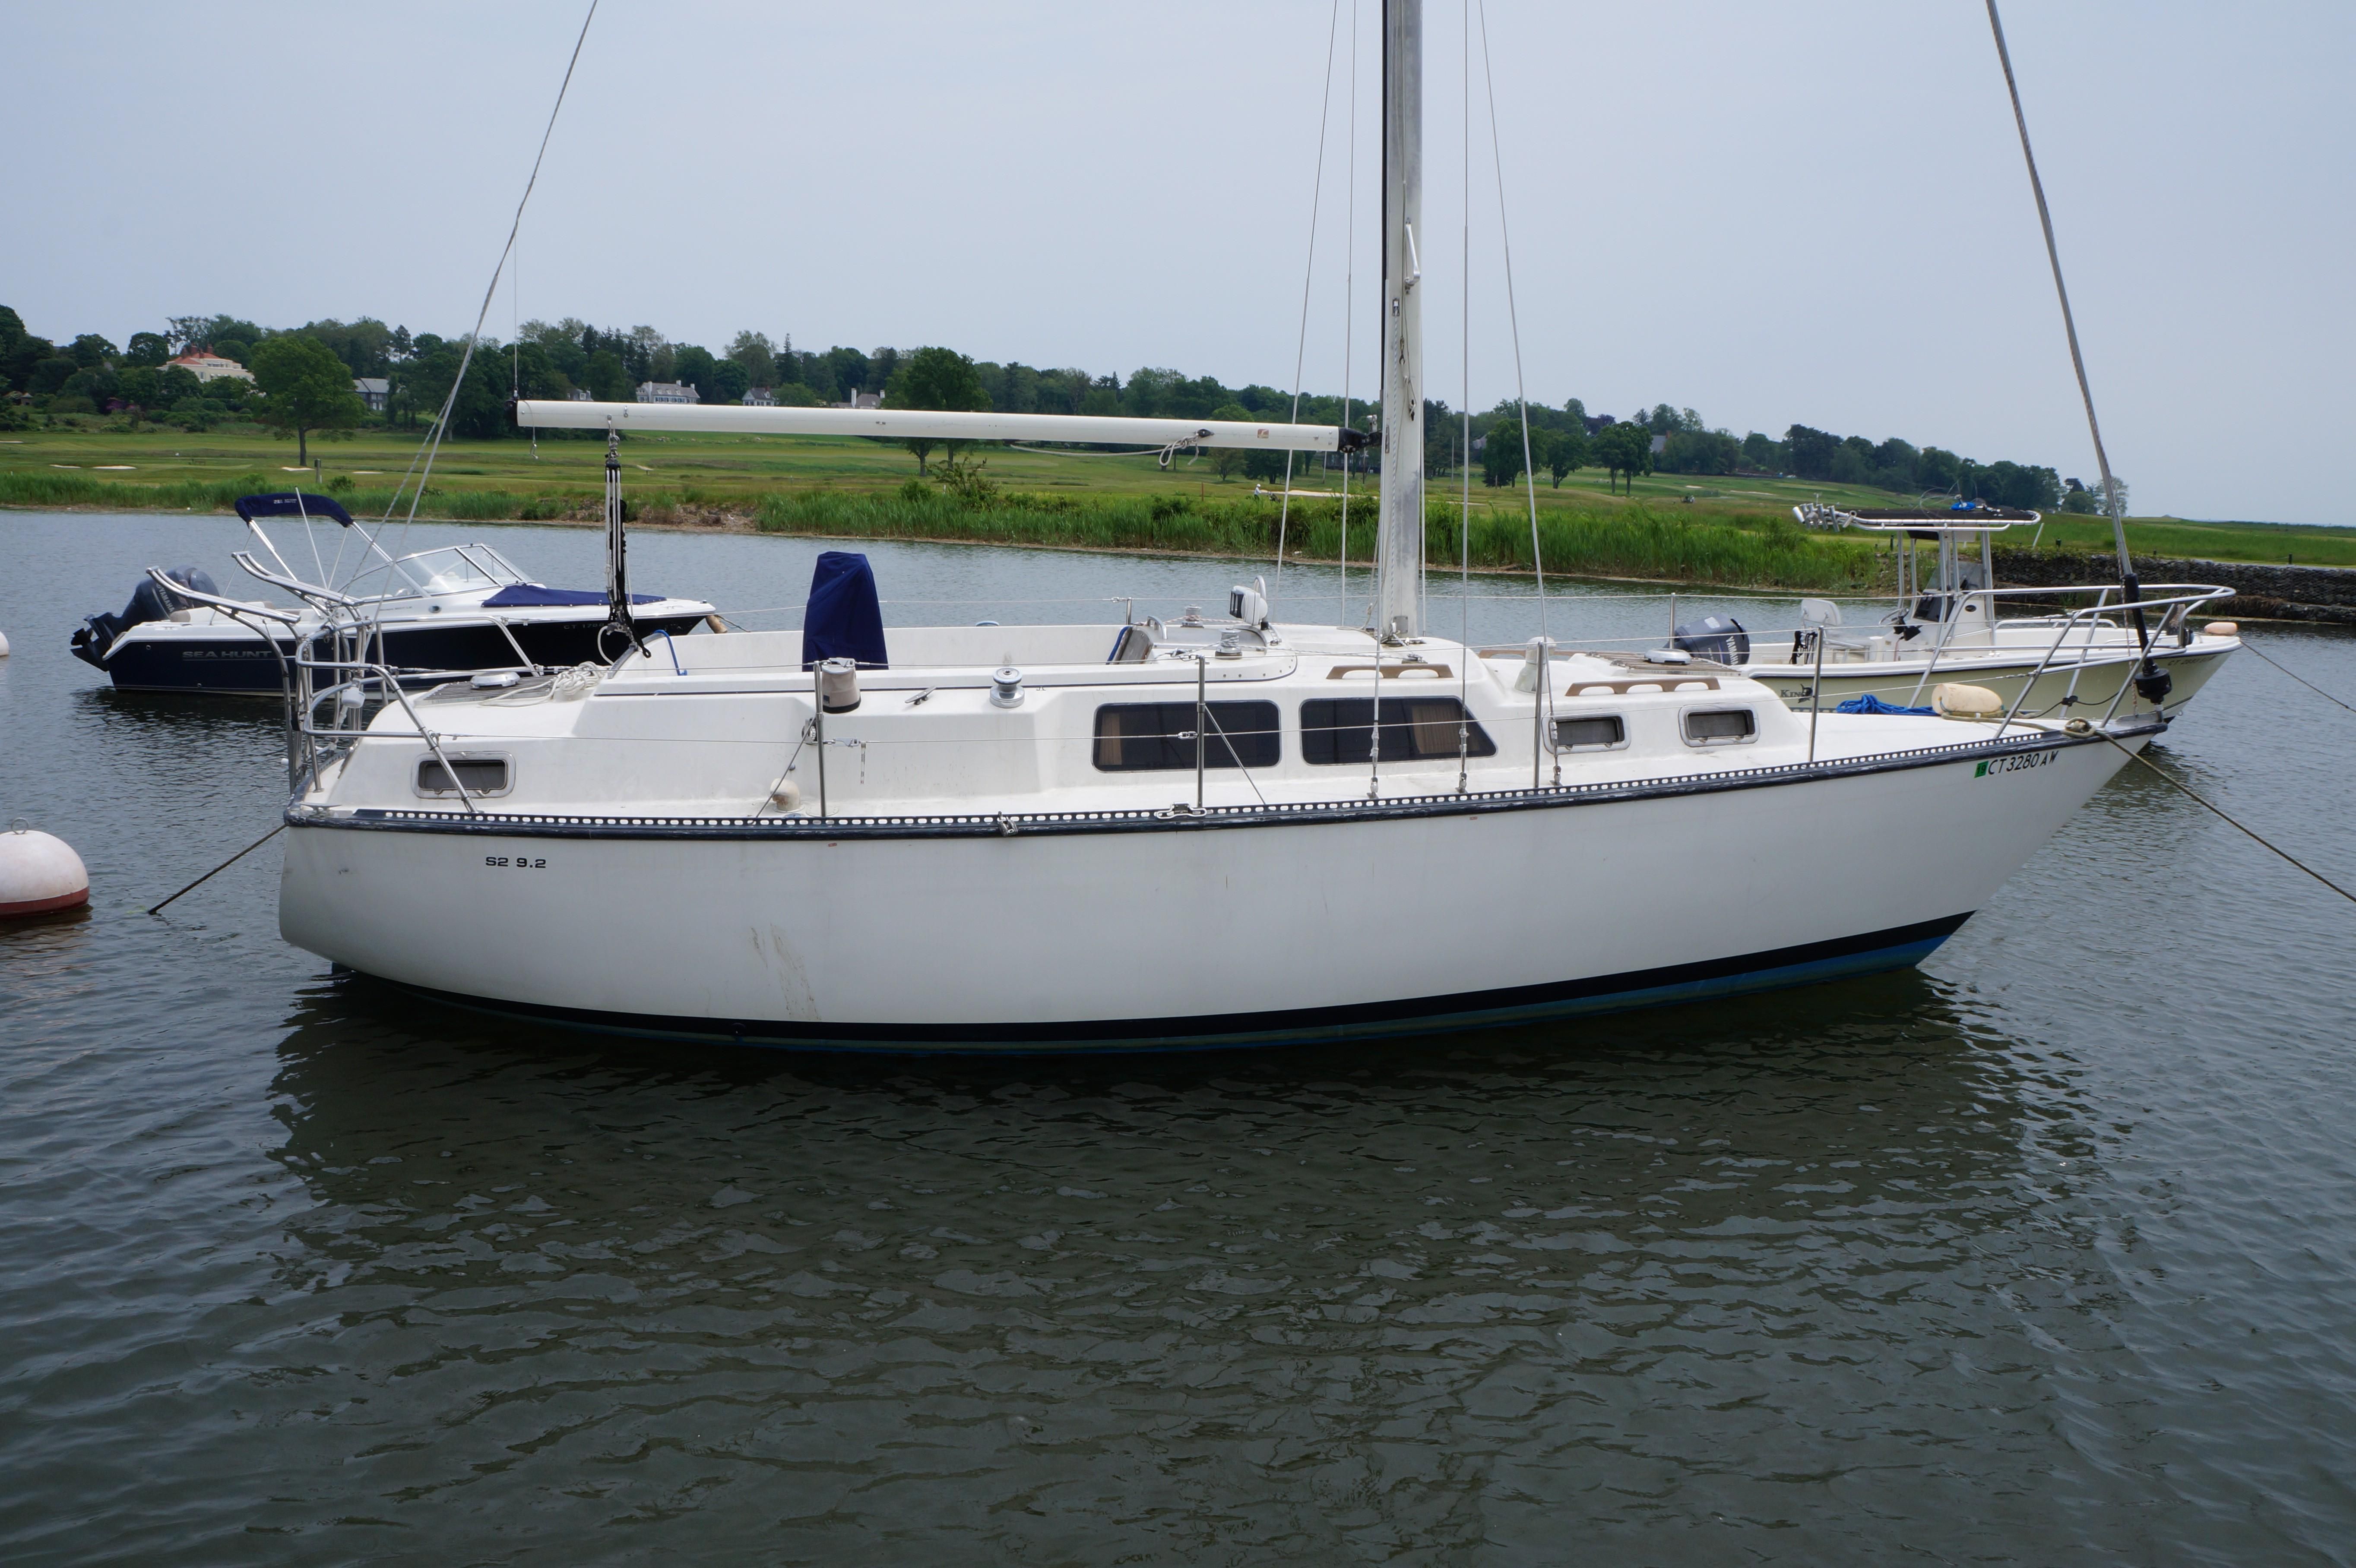 s2 9.2c sailboat for sale